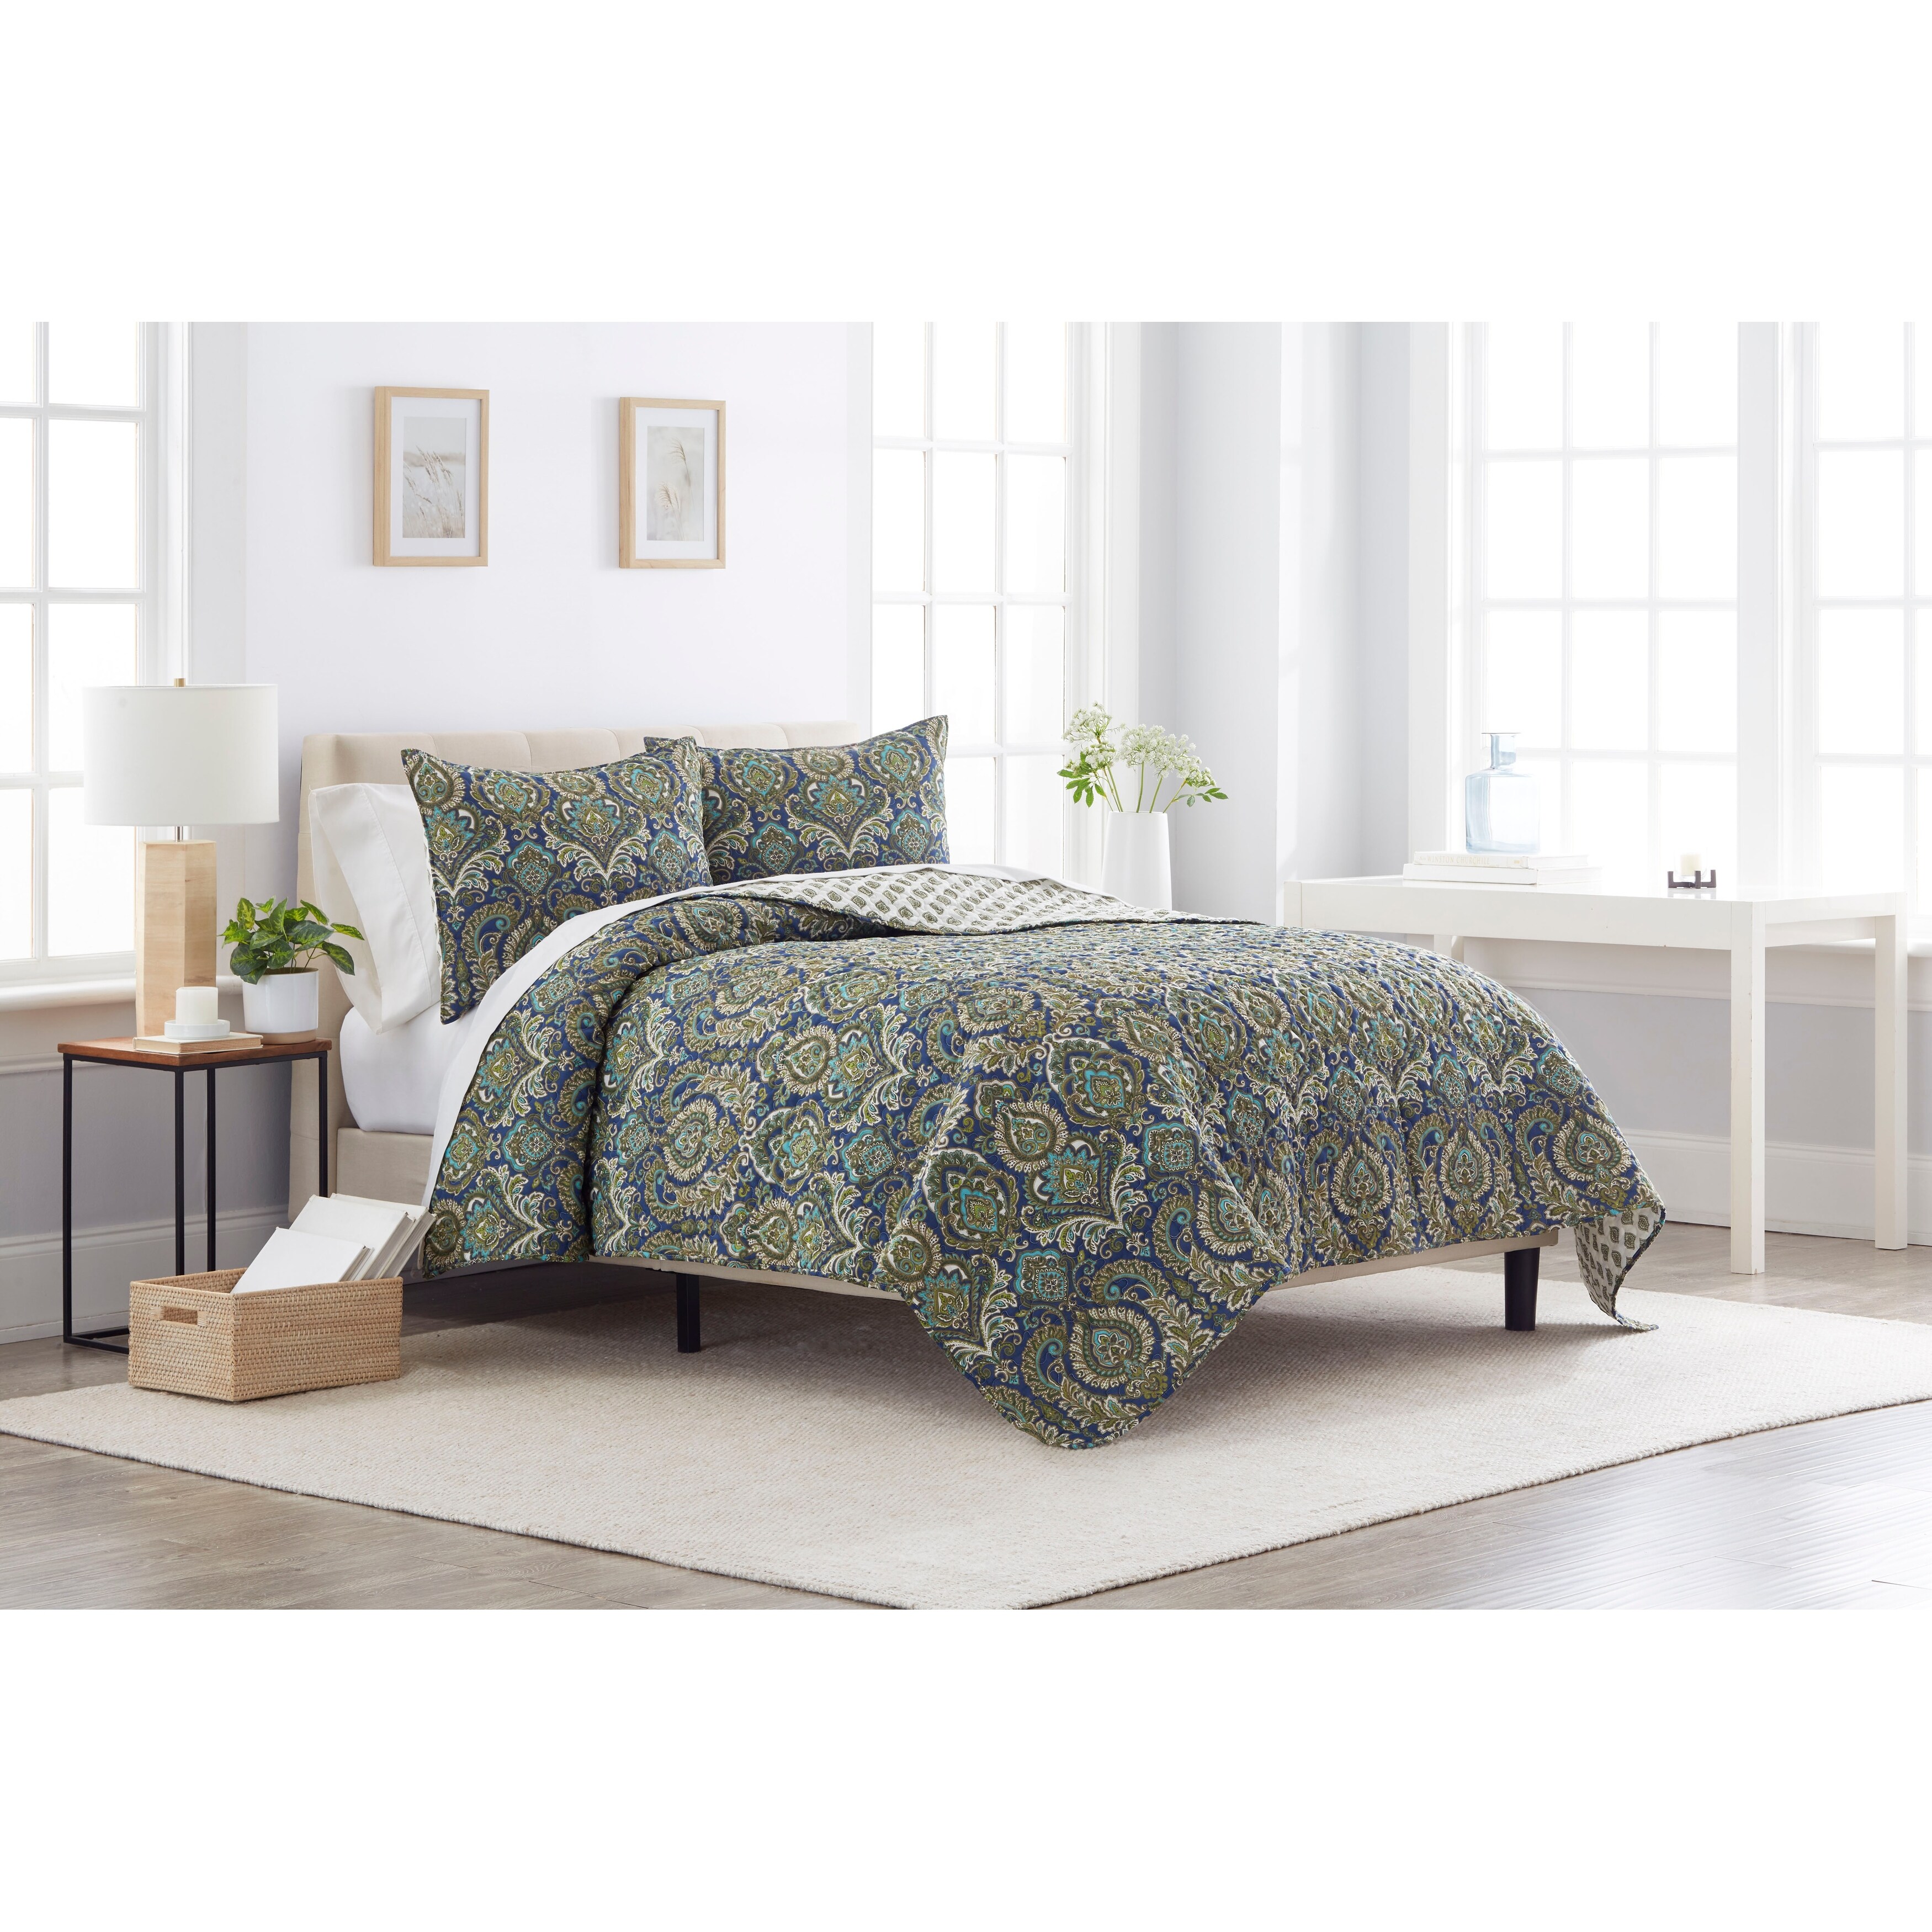 Kingstown Damask Quilt Bedding Collection